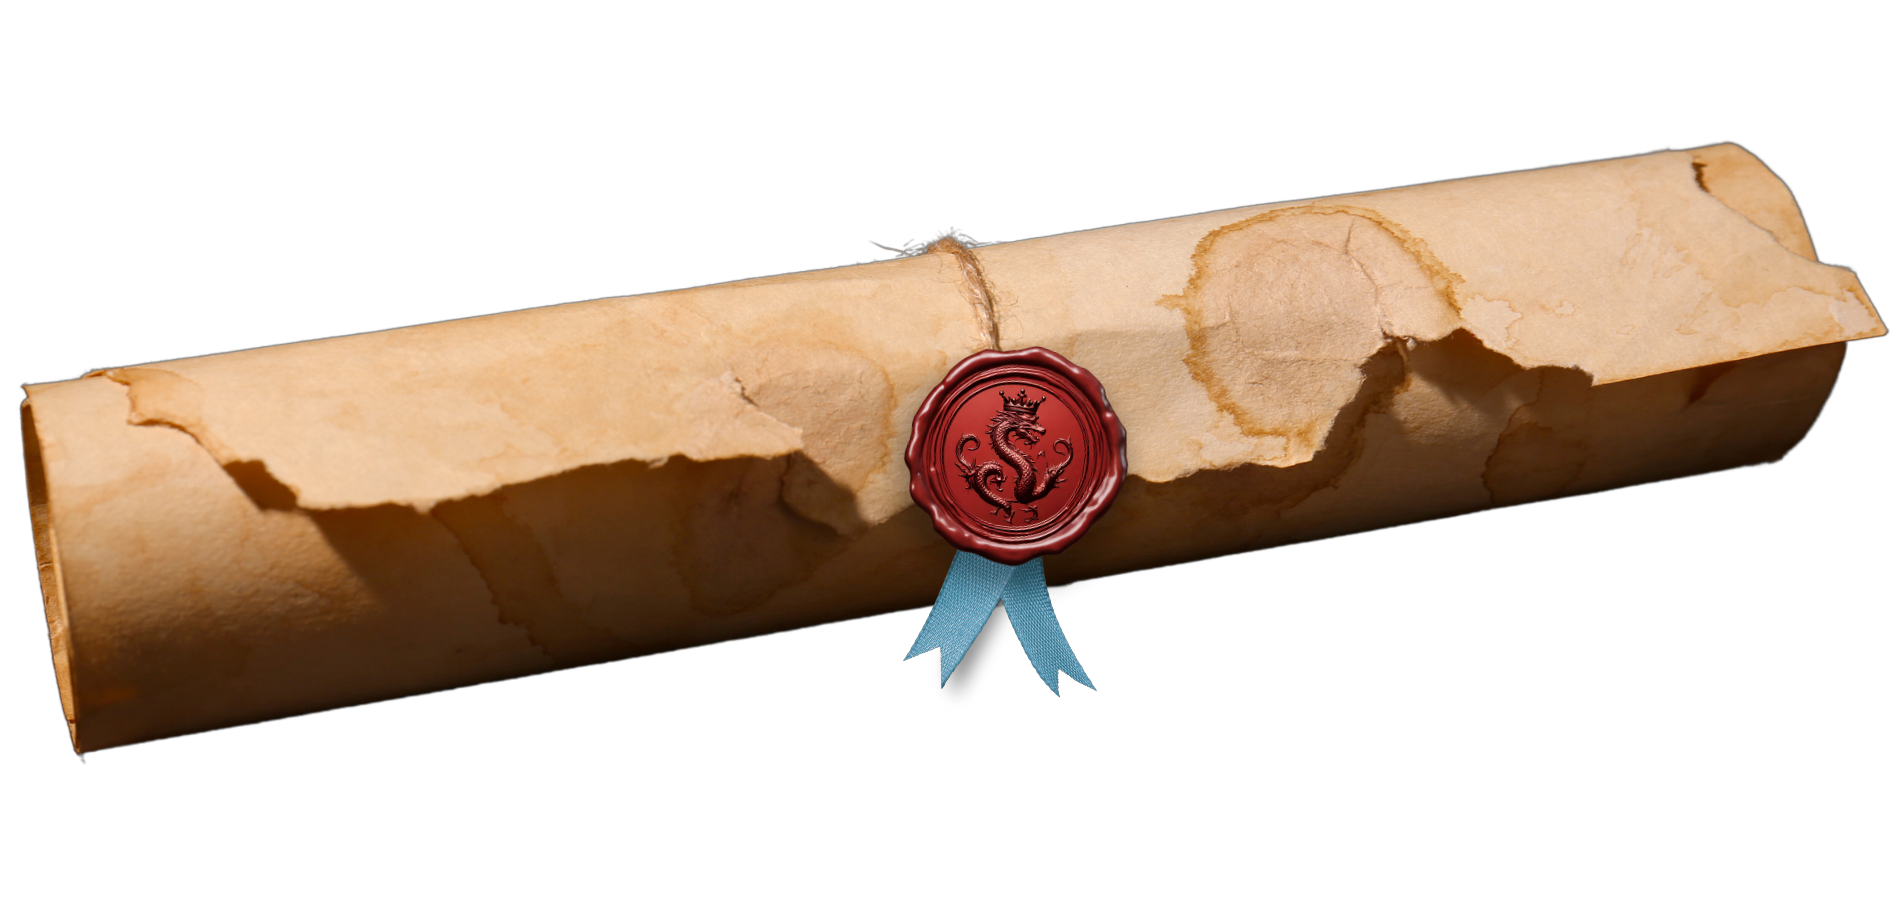 tan scroll rolled up with red wax seal